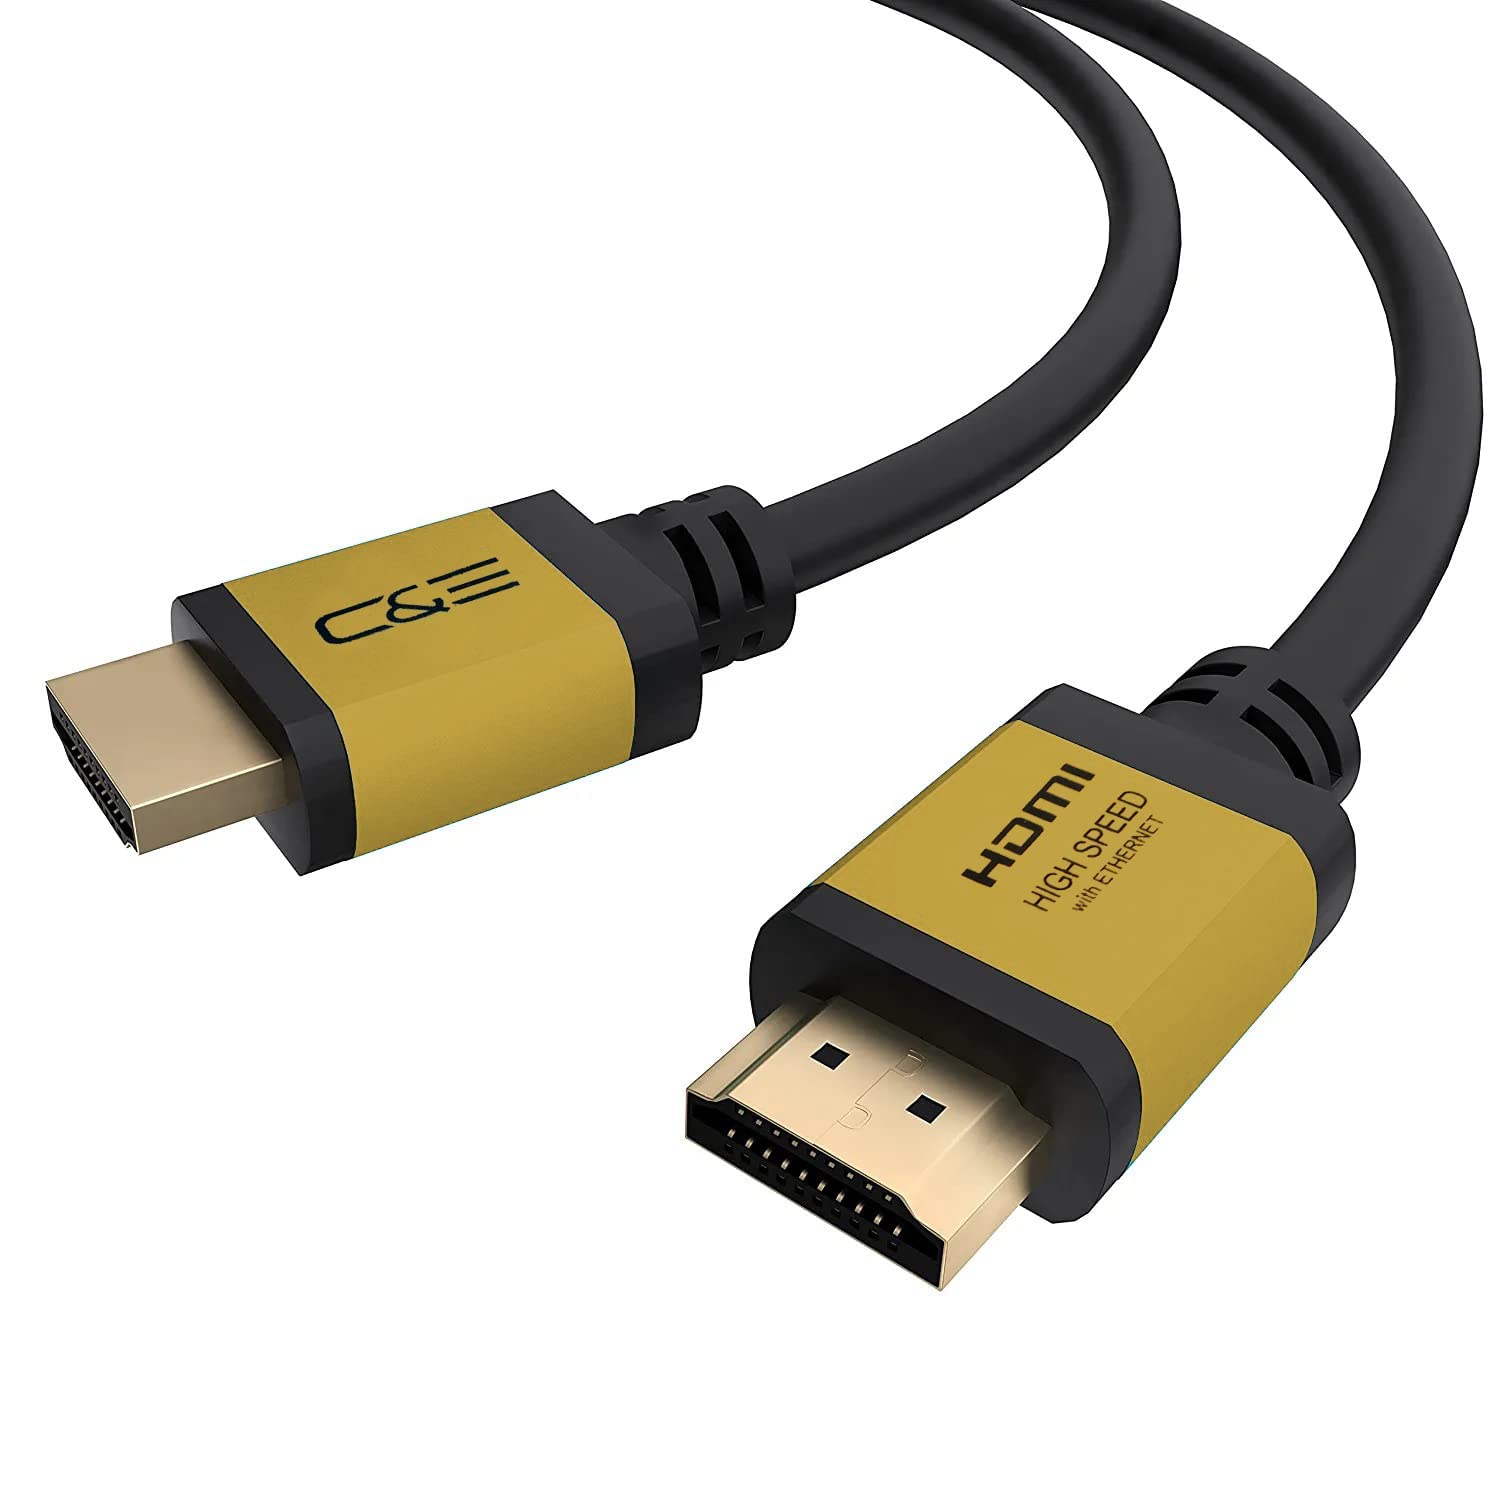 Ensure that the HDMI cable is securely connected to both the projector and the source device.
Try using a different HDMI cable to rule out any potential cable issues.